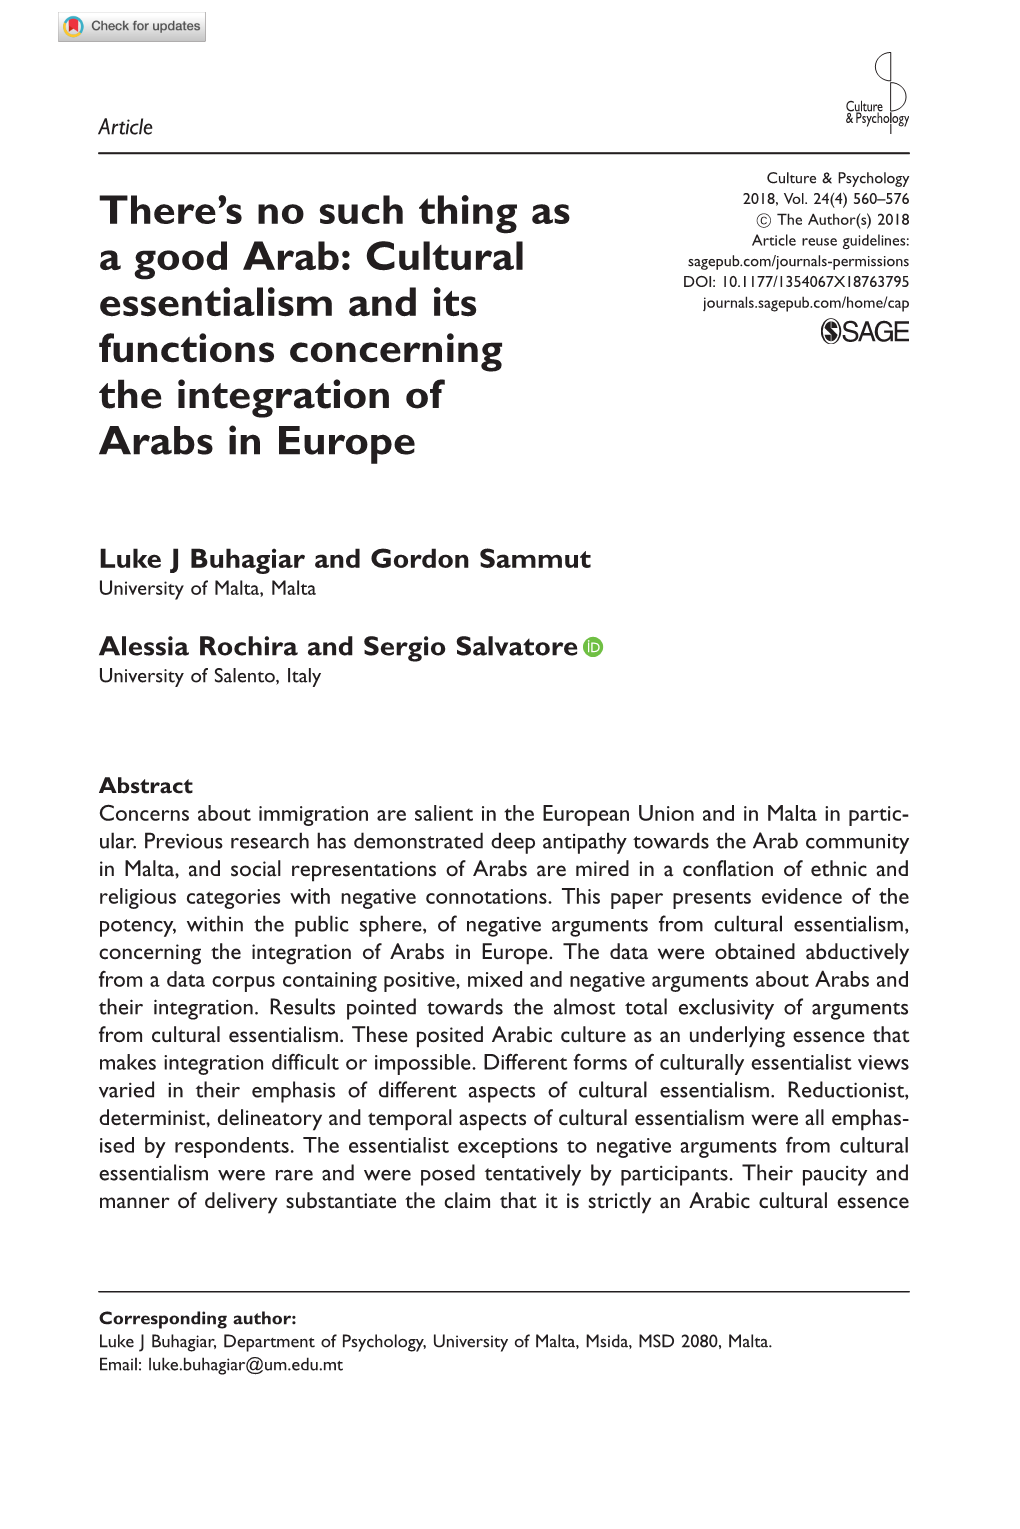 Cultural Essentialism and Its Functions Concerning the Integration of Arabs